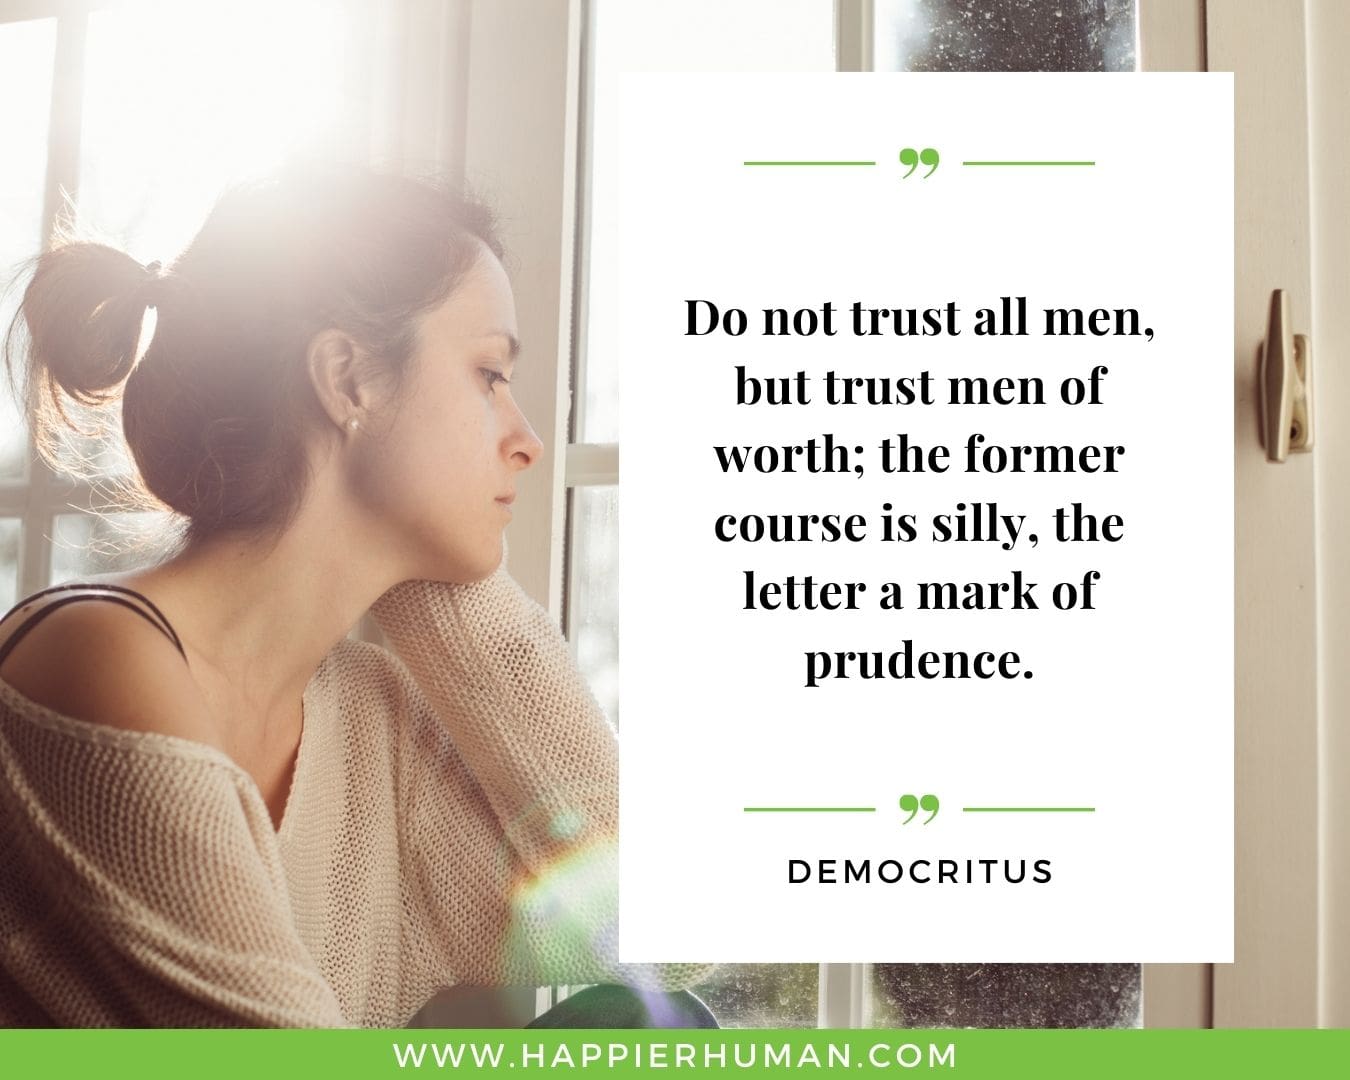 Broken Trust Quotes - “Do not trust all men, but trust men of worth; the former course is silly, the letter a mark of prudence.” - Democritus